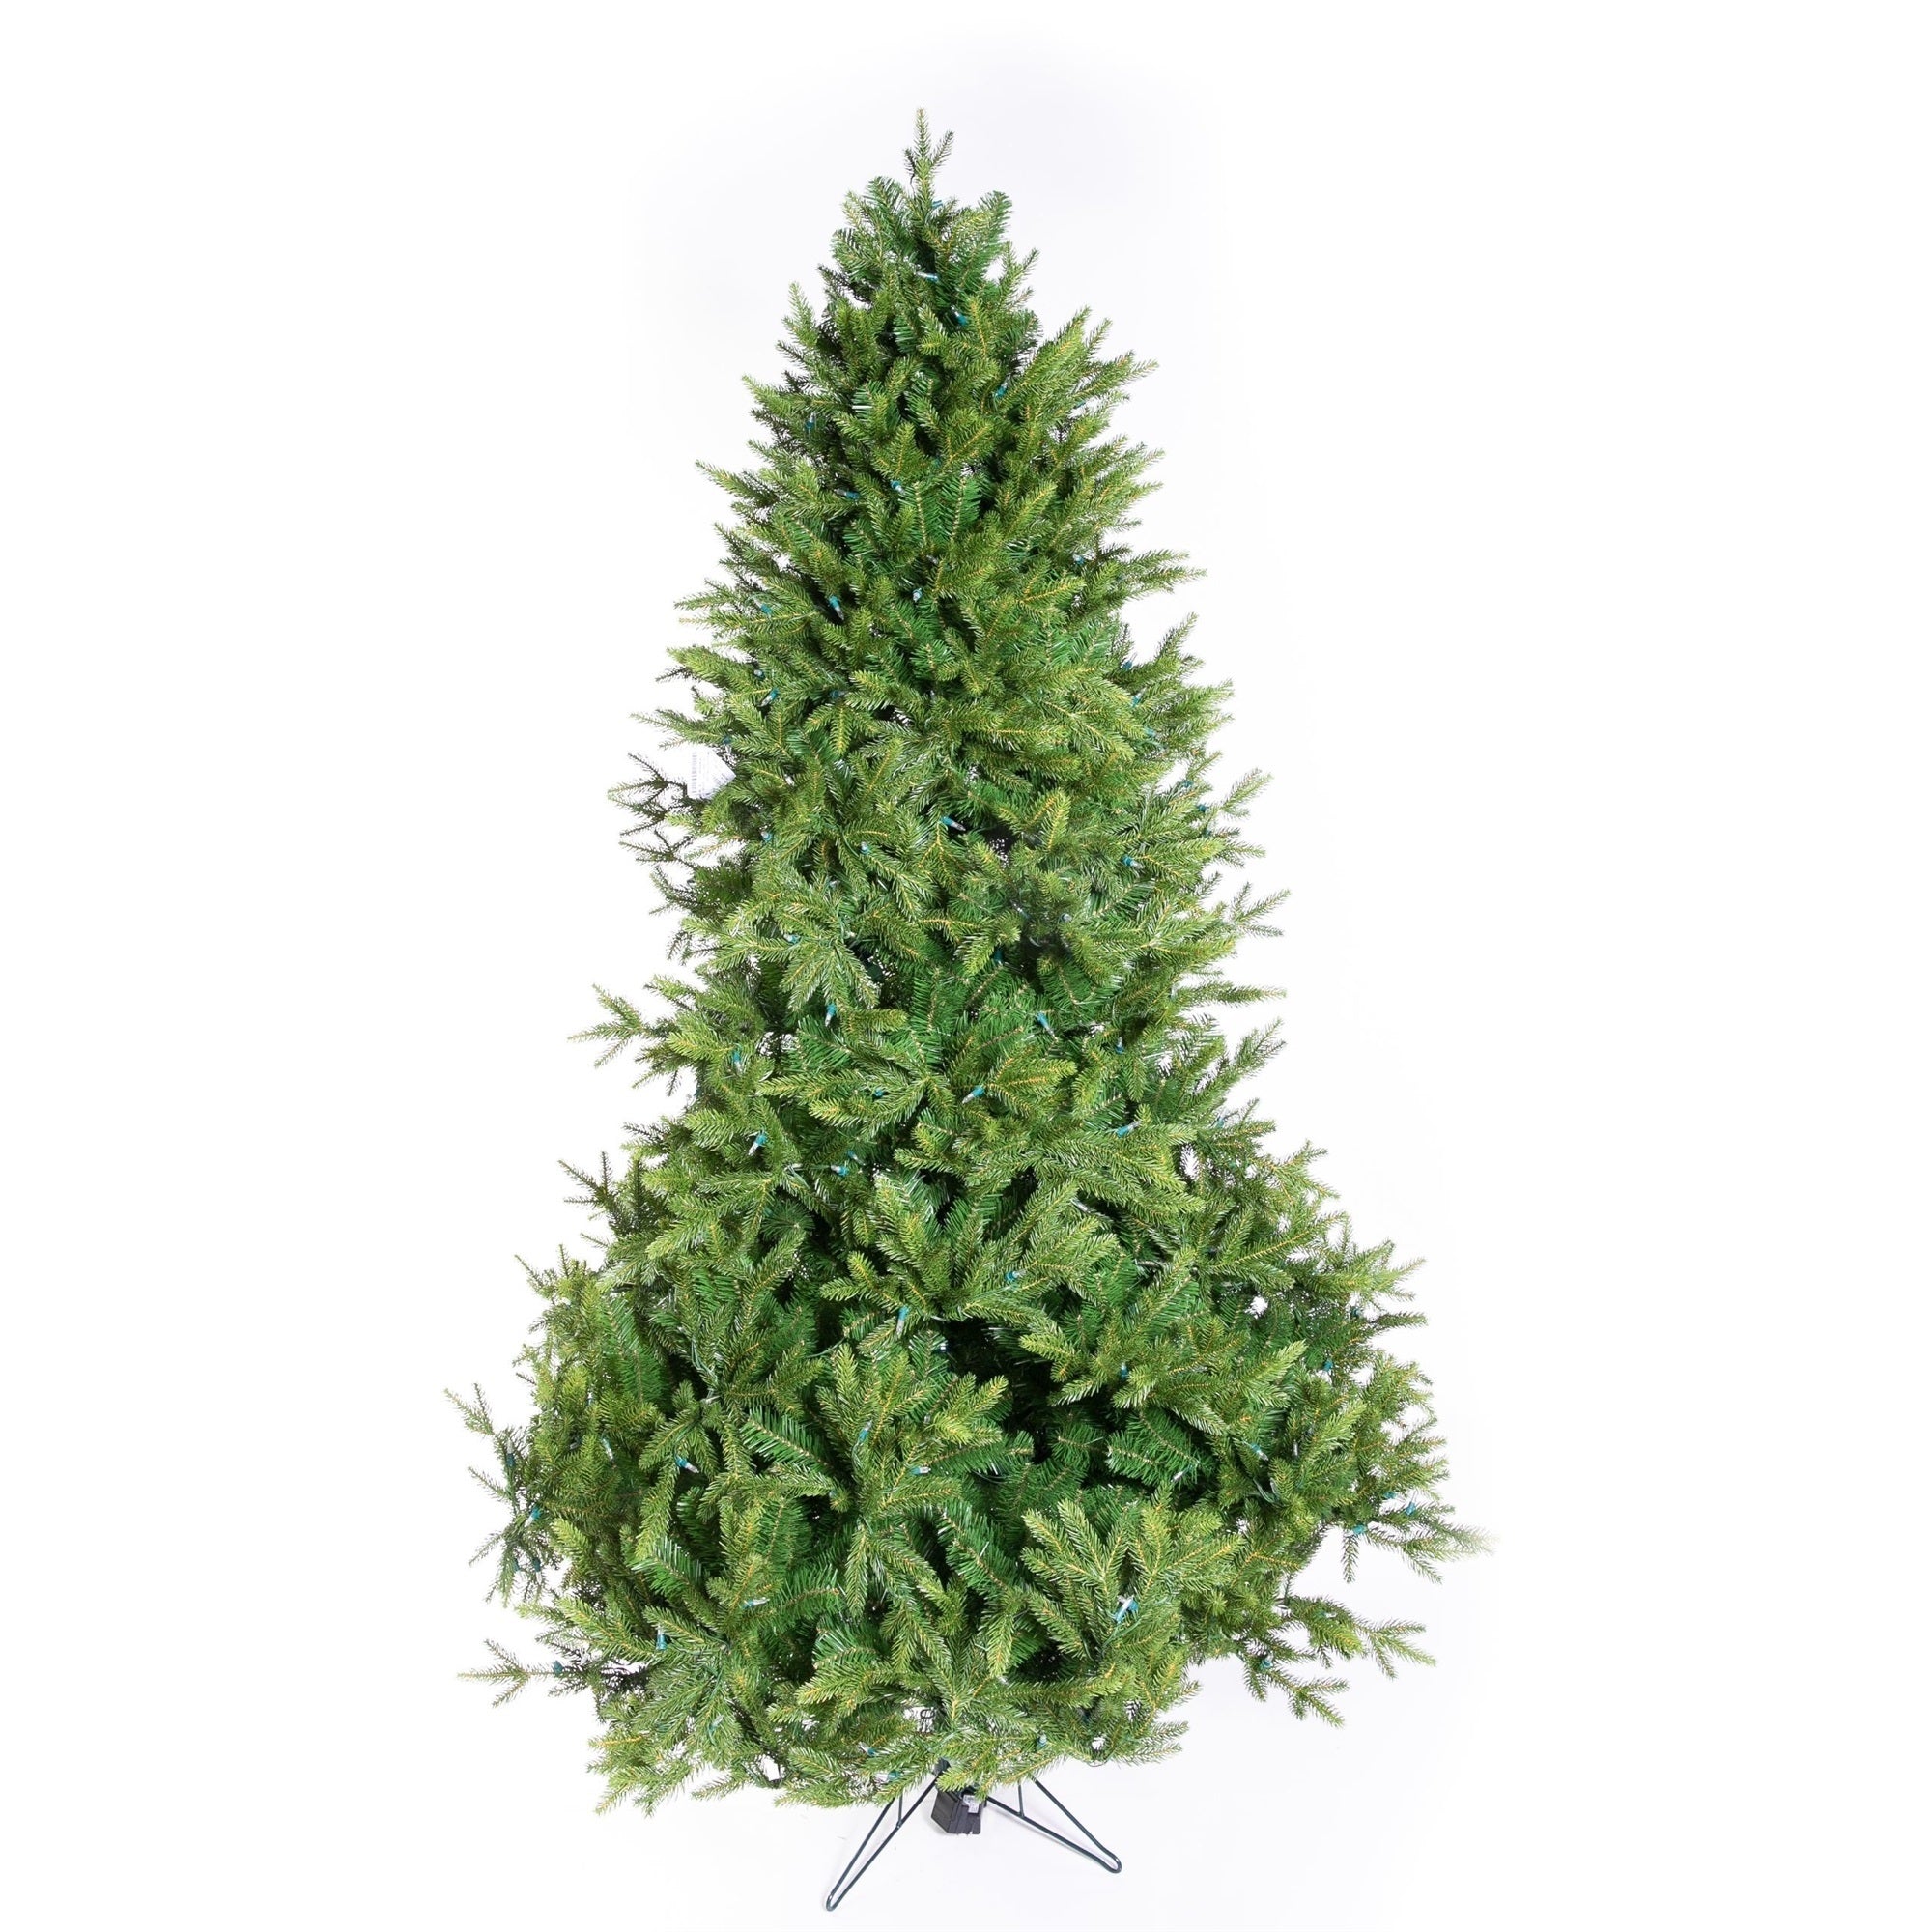 Garden Elements Artificial Pre-Lit North Star Christmas Tree, 503 Tips, 200 LED Clear Lights, 8 Light Functions, 4.5 ft